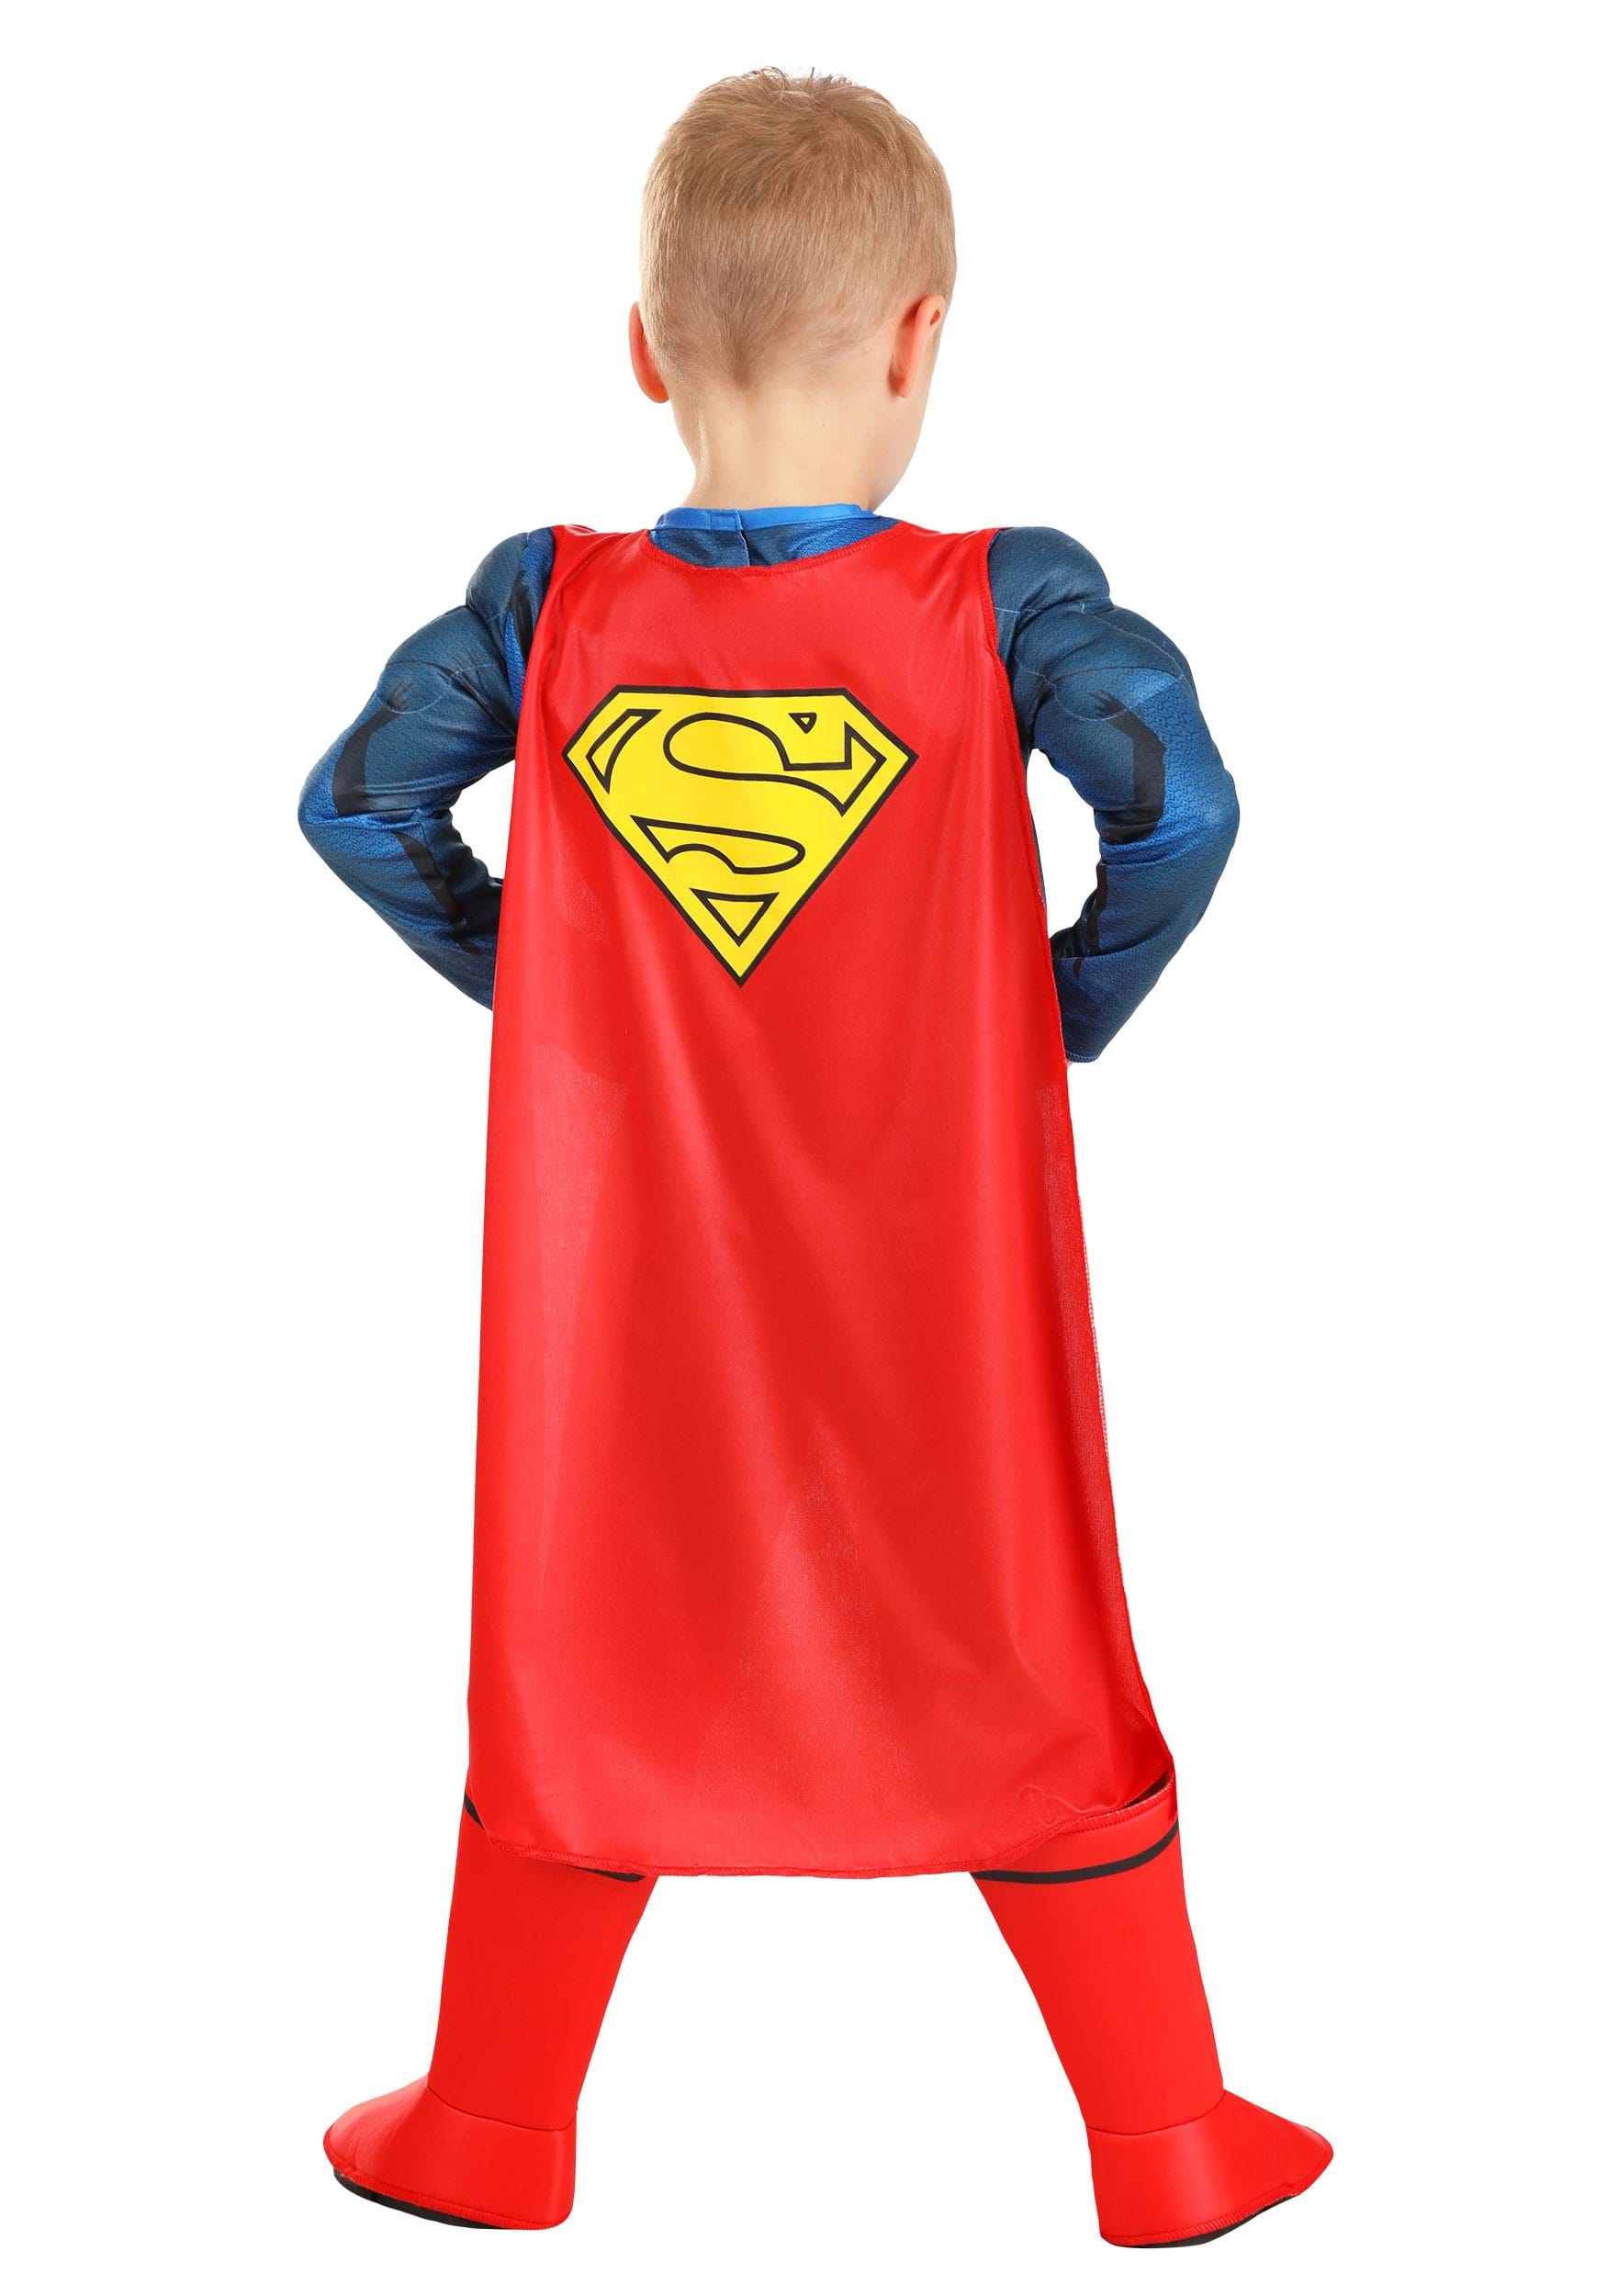 Classic Superman Costume For Toddlers